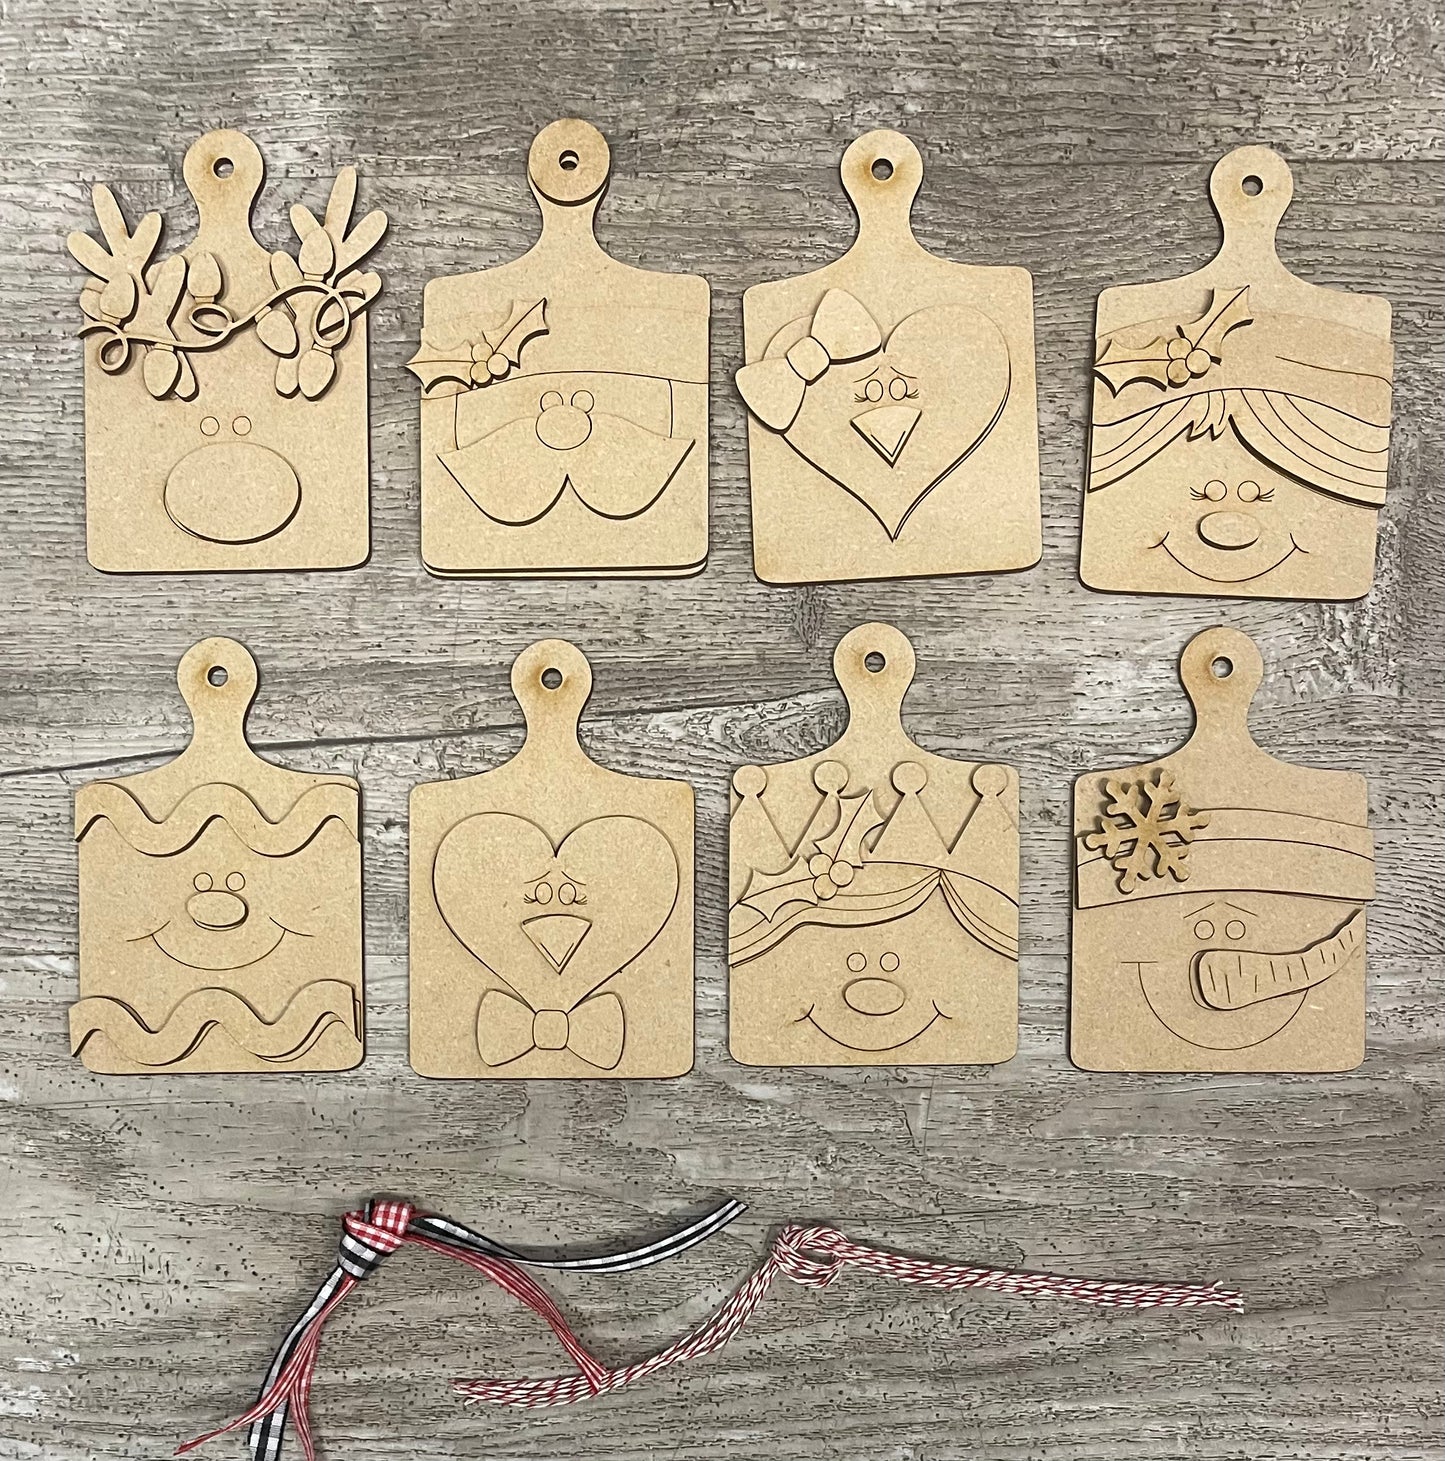 Christmas Mini Cutting Board wooden ornaments - set of 8 cutouts, unpainted ready for you to finish